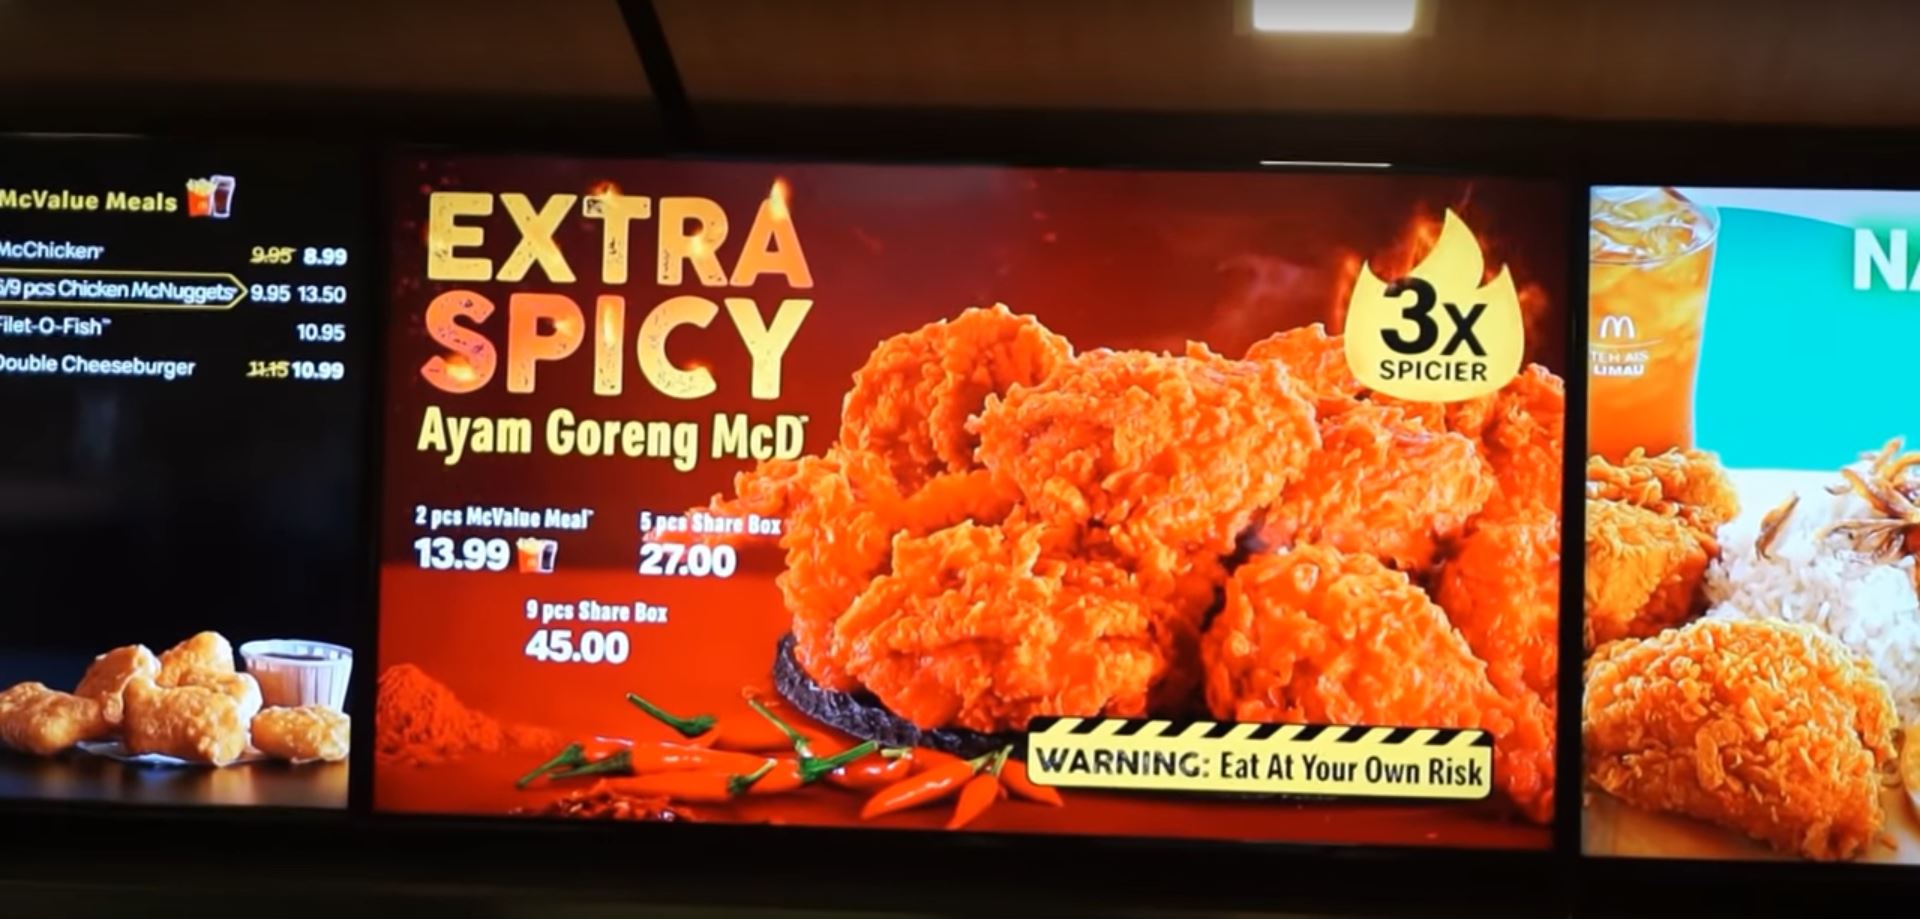 McDonaldu0027s 3x Spicier Ayam Goreng Will Launch In All Mu0027sia Outlets 